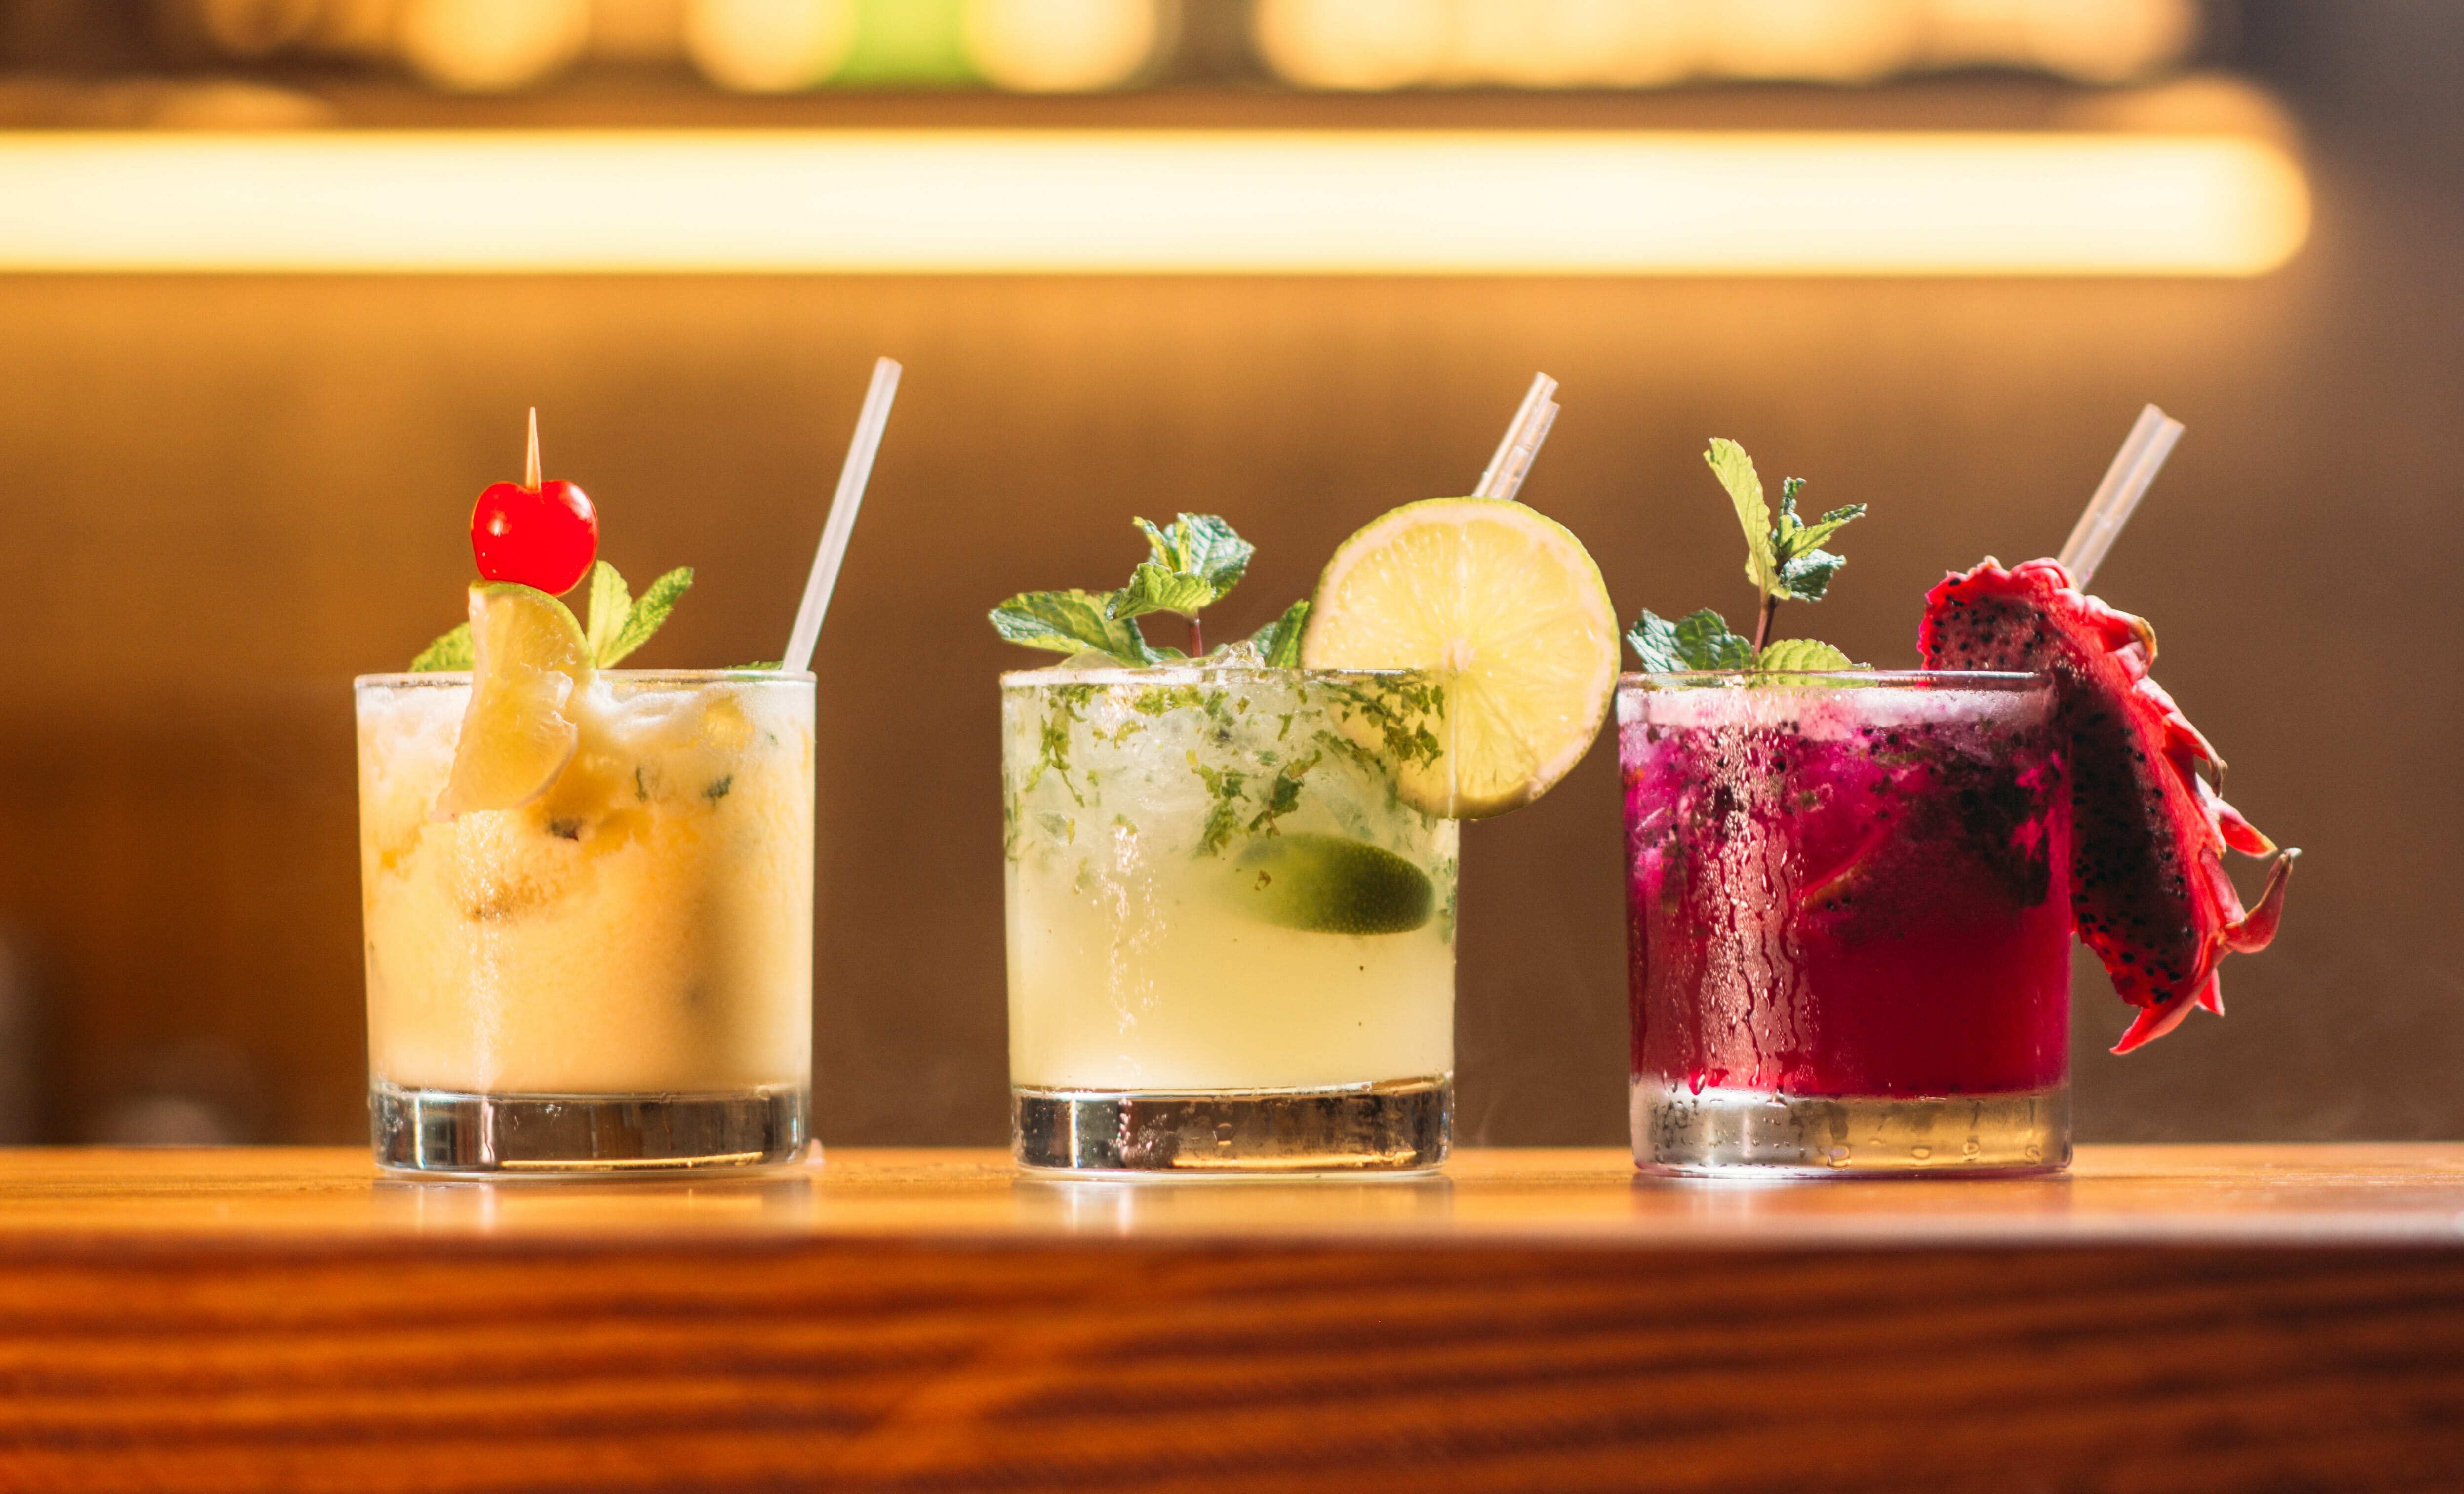 Your Liver Will Thank You Our Guide to the Best Mocktails in the City